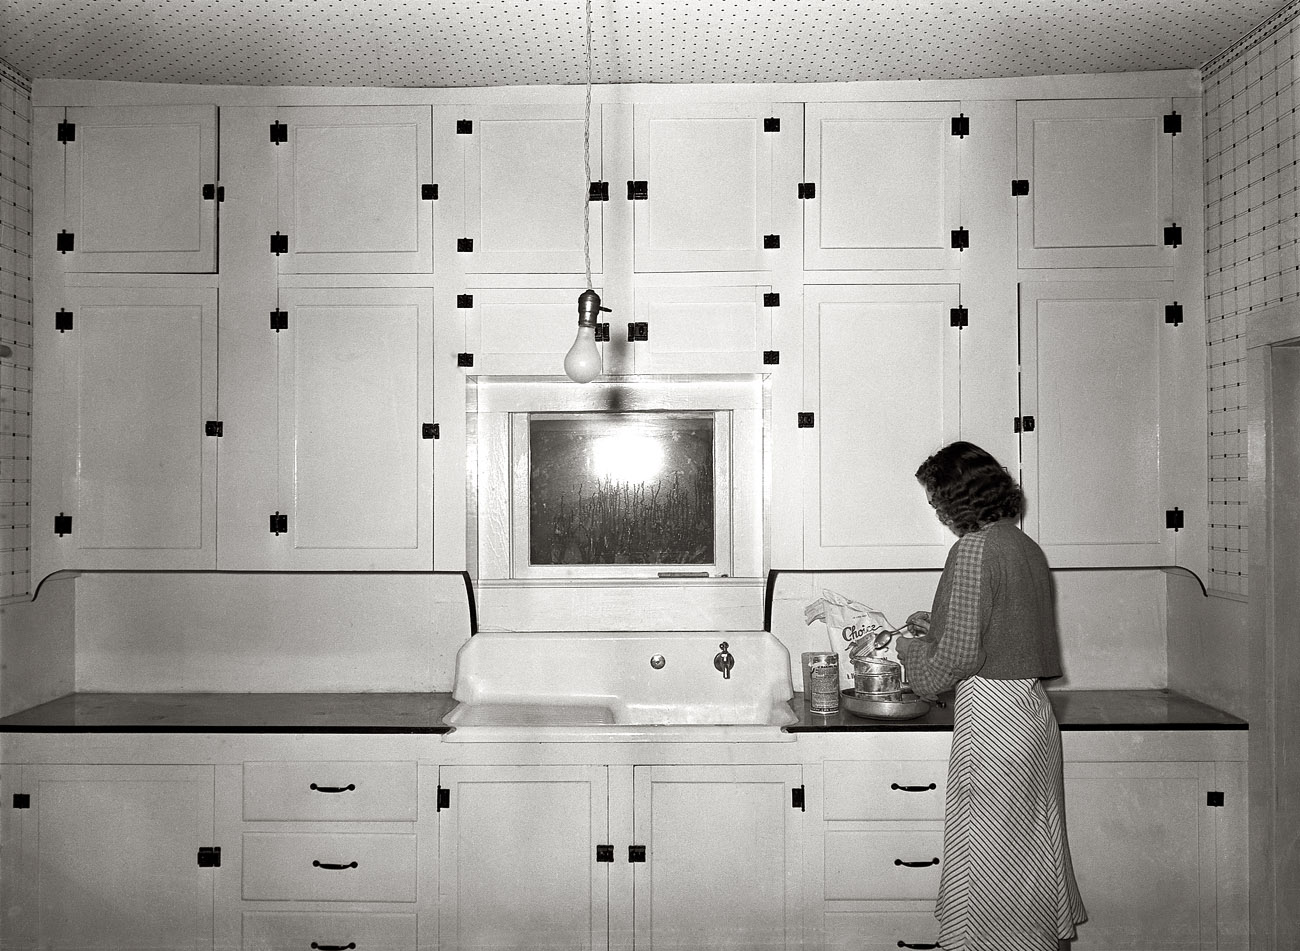 February 1939. Hidalgo County, Texas. "Kitchen of Farm Security Administration tenant purchase client." View full size. Medium format nitrate negative by Russell Lee for the Farm Security Administration.